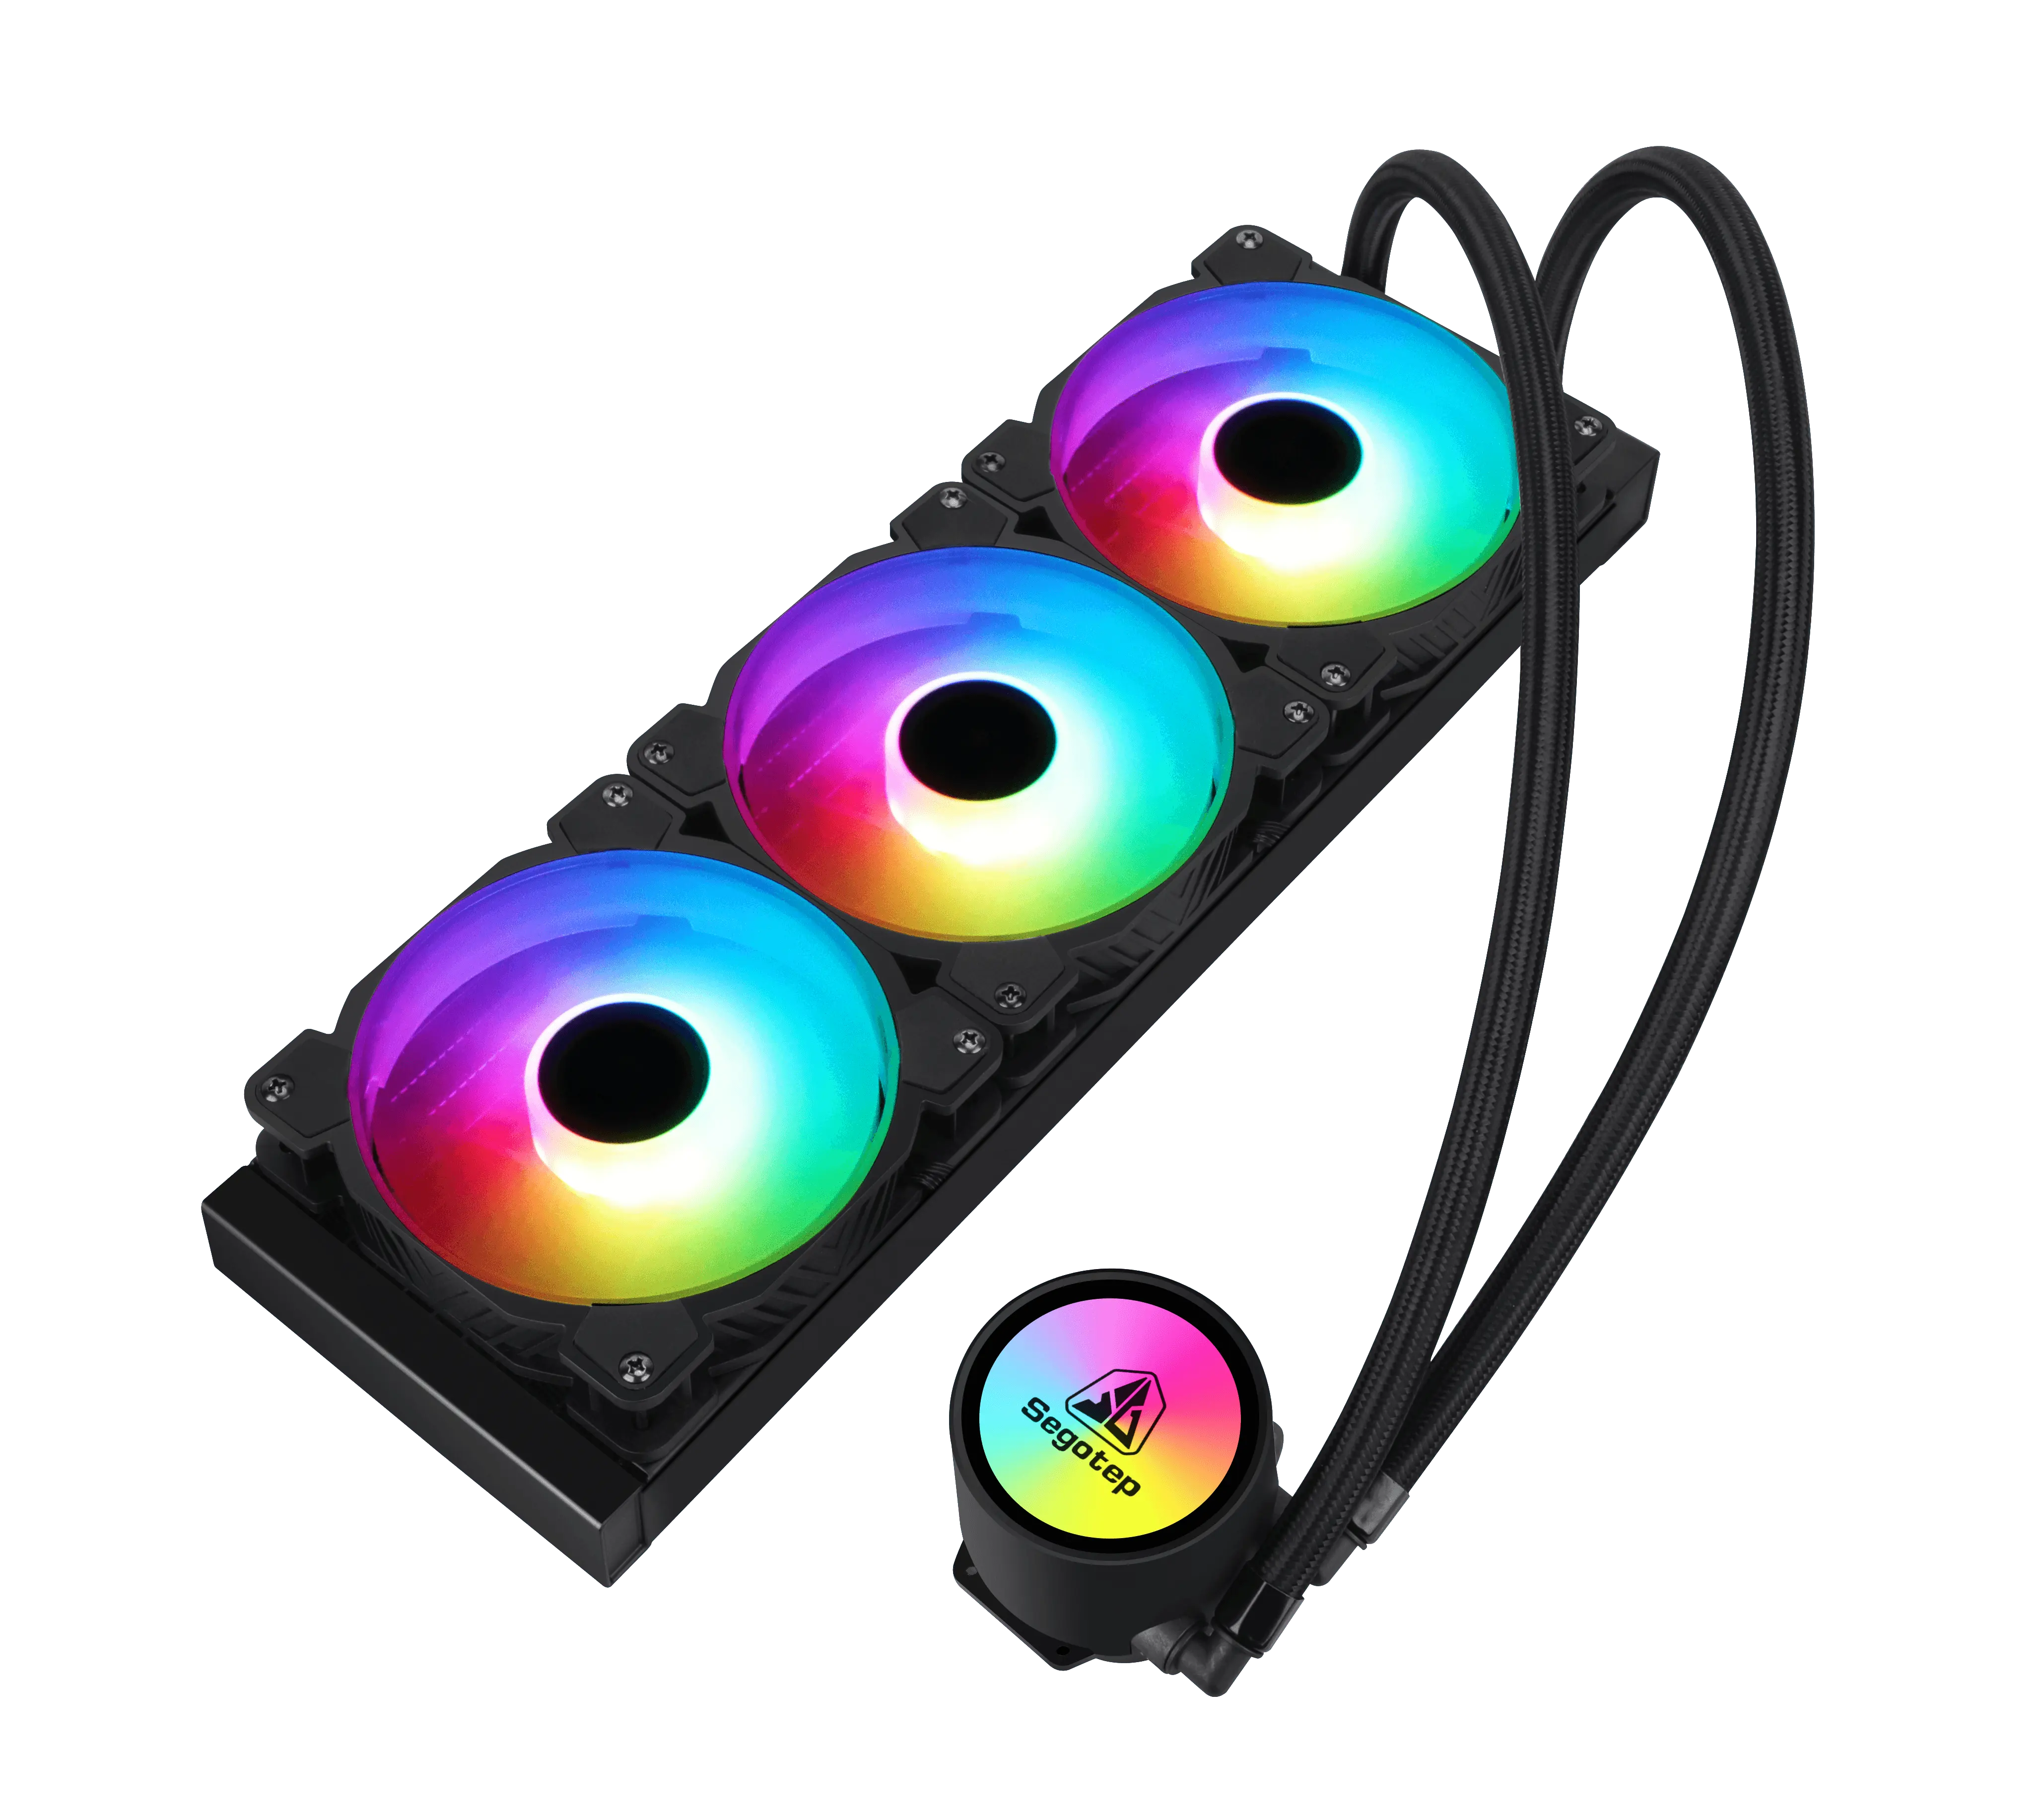 High Quality Frozen 360 Colorful PC Computer Water Cooler CPU Cooler Fan Cooling